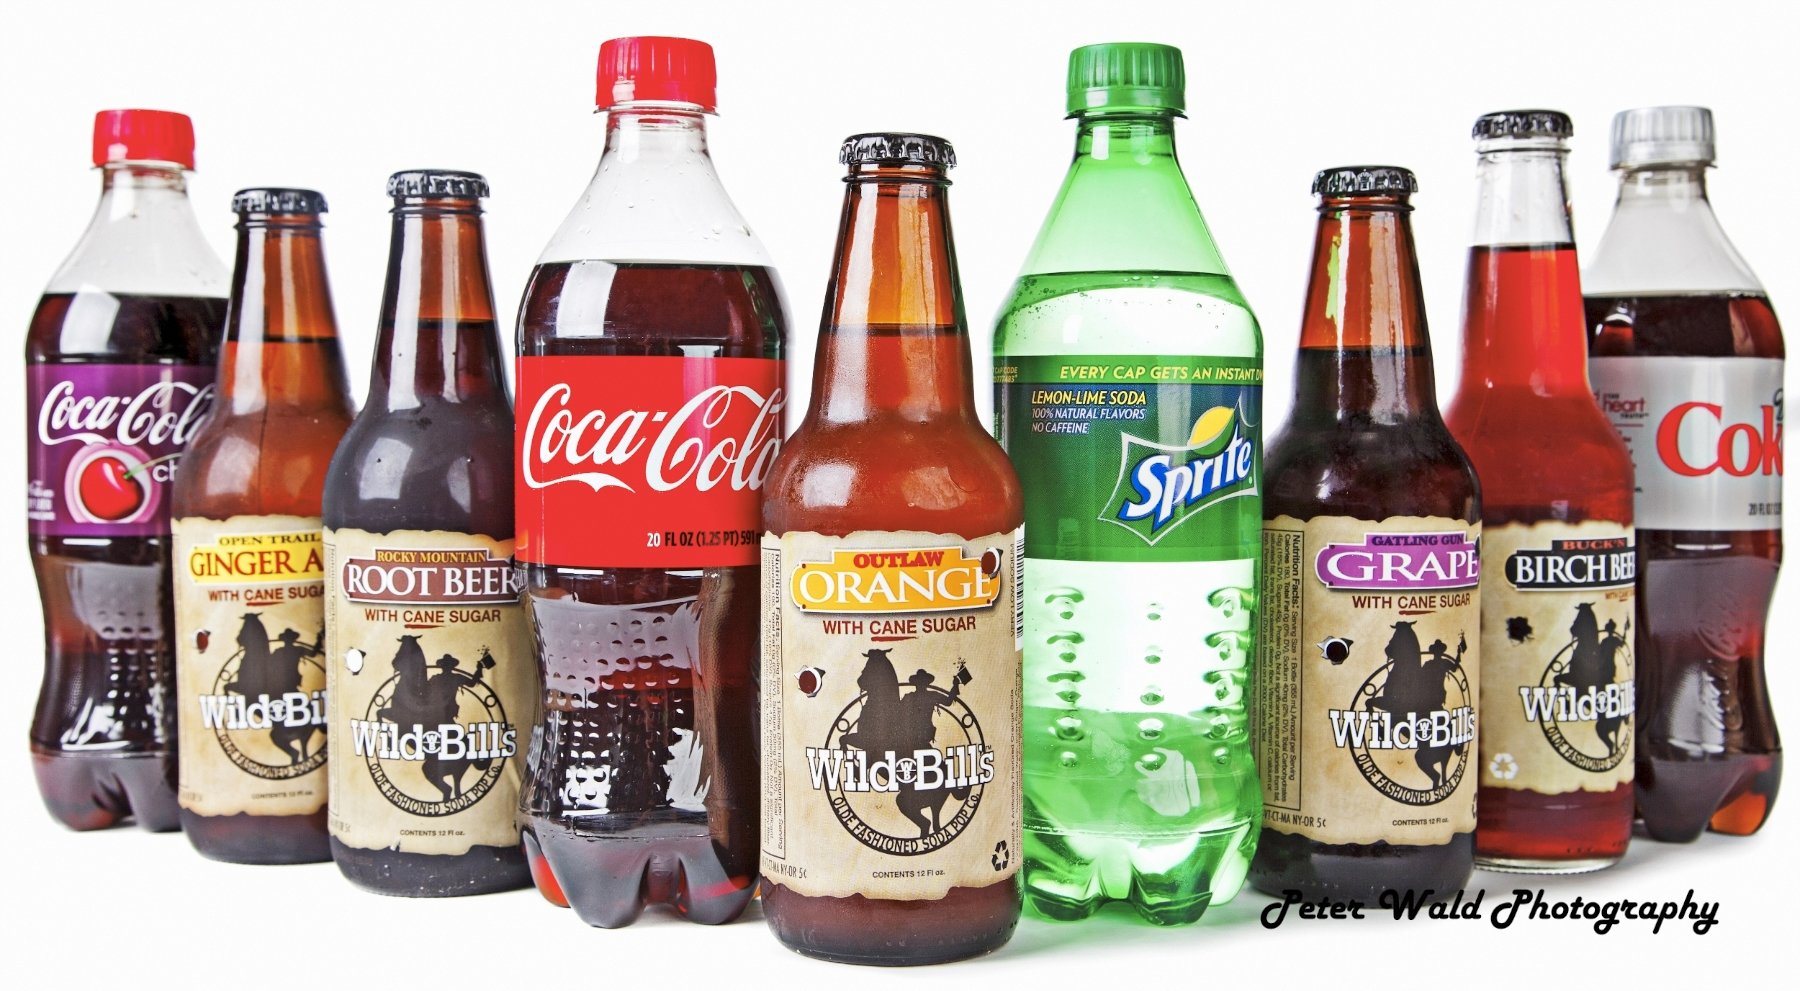 Diabetes Now Linked to Soda Consumption - High Fructose Corn Syrup is the Culprit